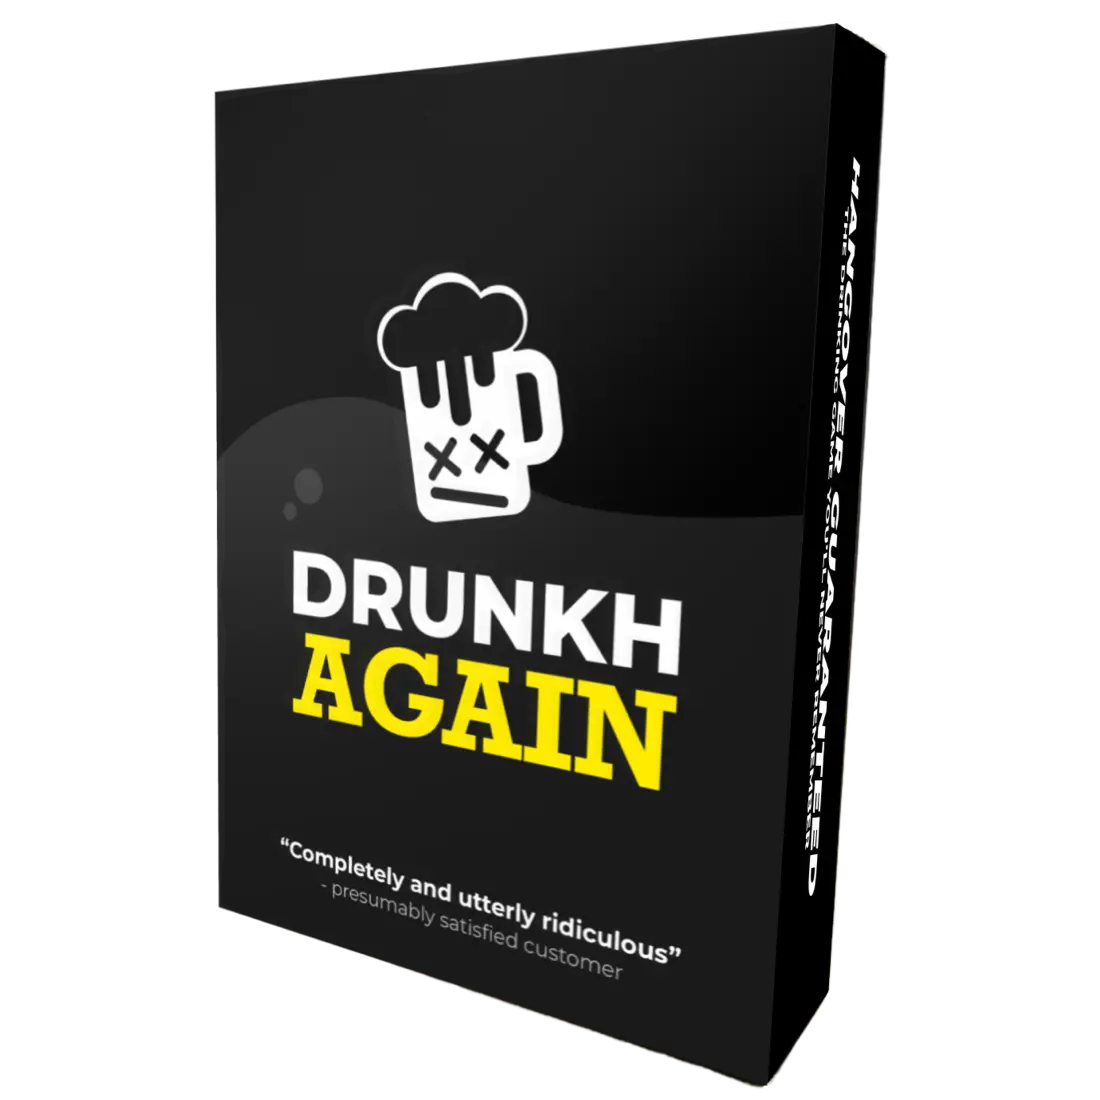 FIBUP DRUNKH BUNDLE - Two Offensive Drinking Games